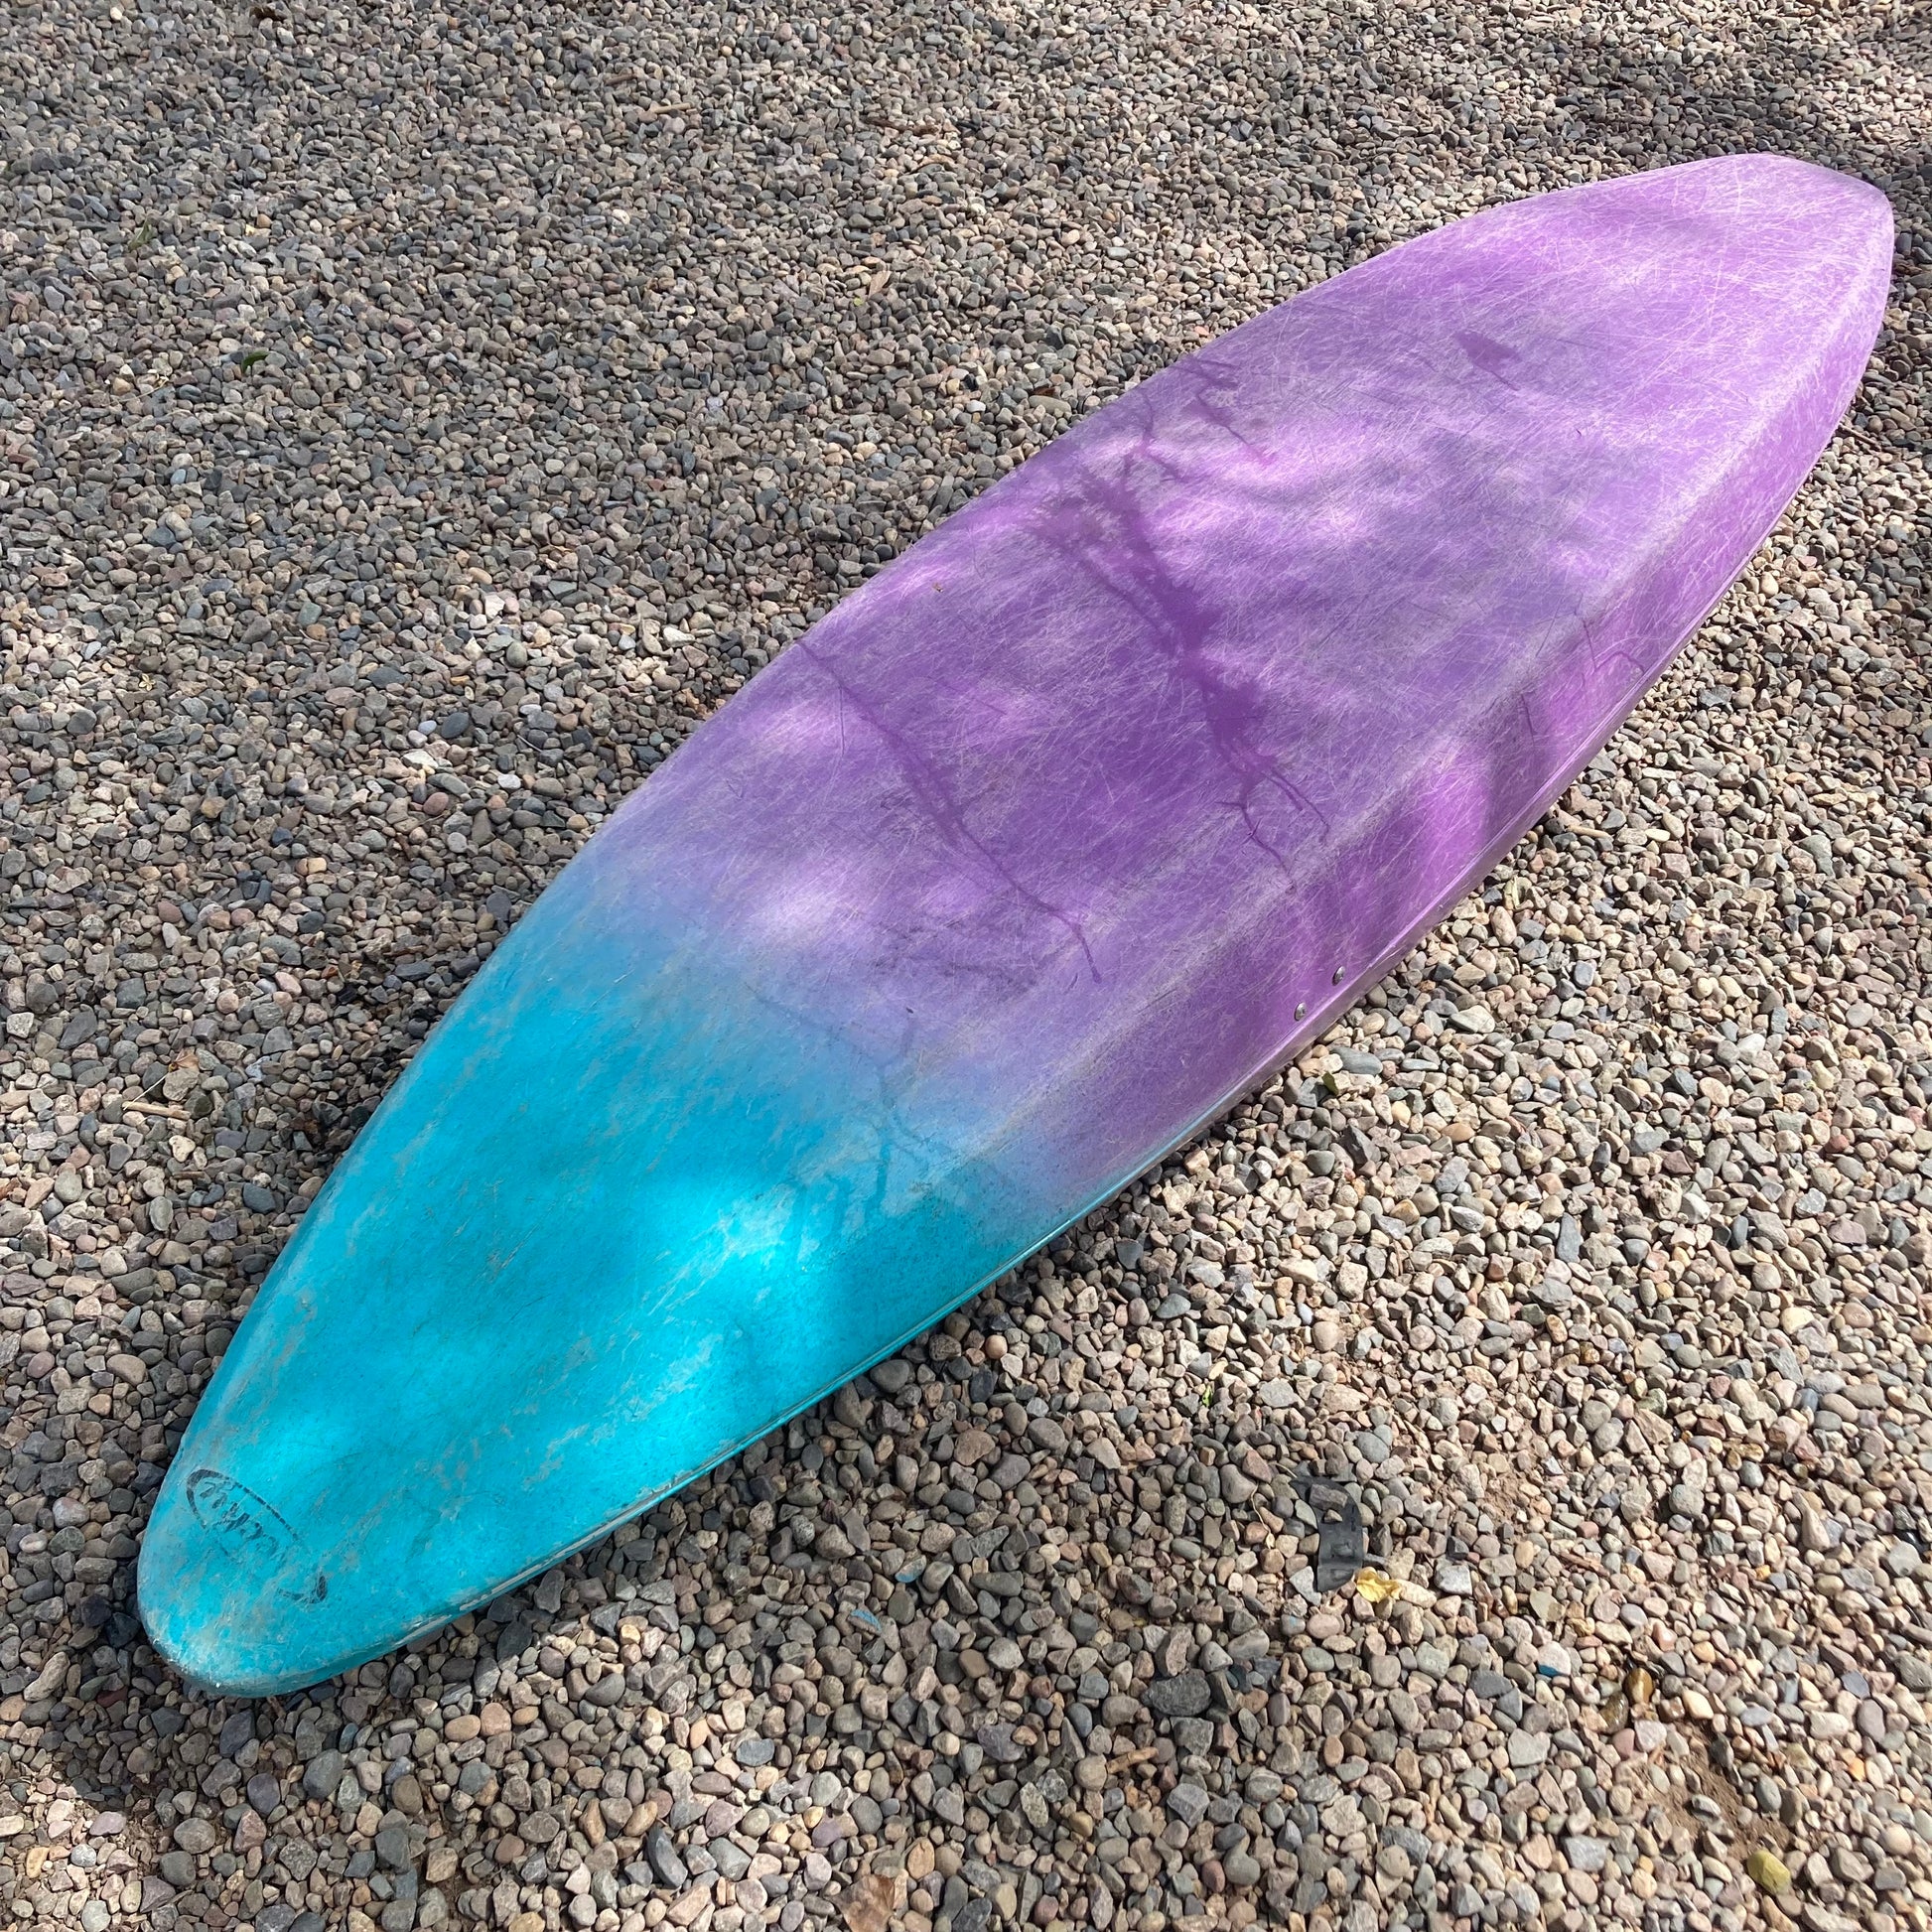 A purple and blue Consignment Necky Jive surfboard laying on the ground, made by 4CRS.